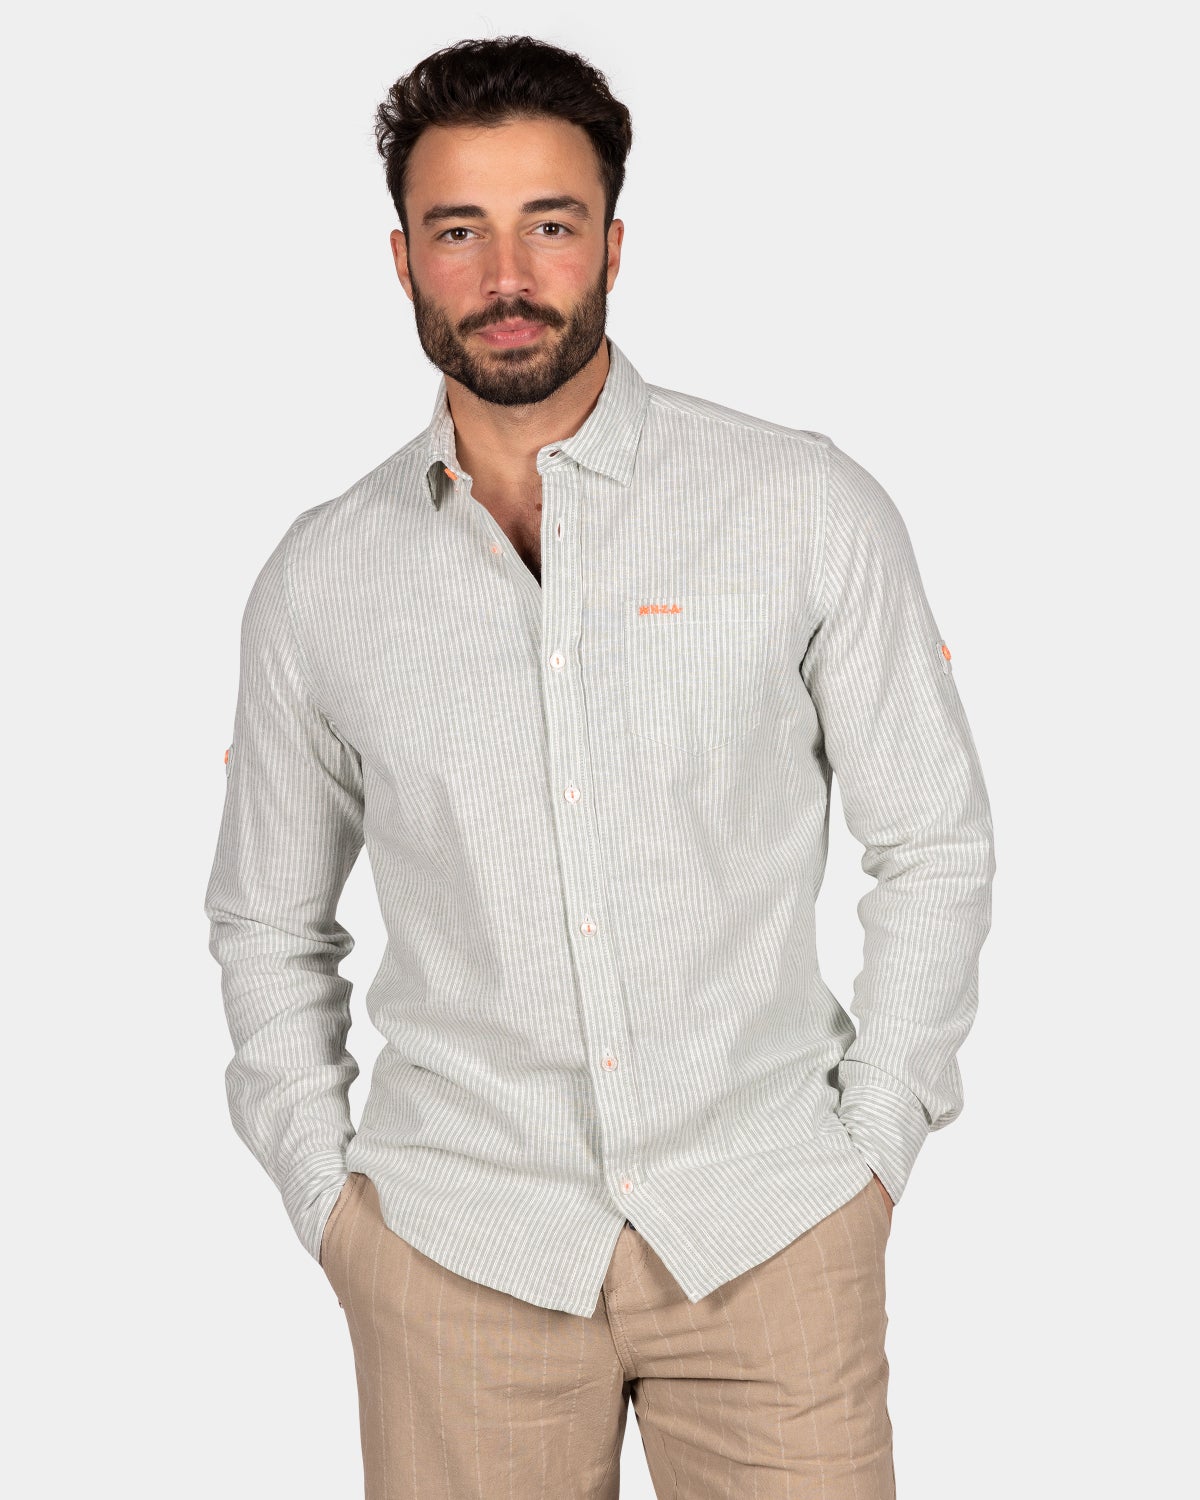 Light-colored shirt made of linen and cotton - Soft Olive